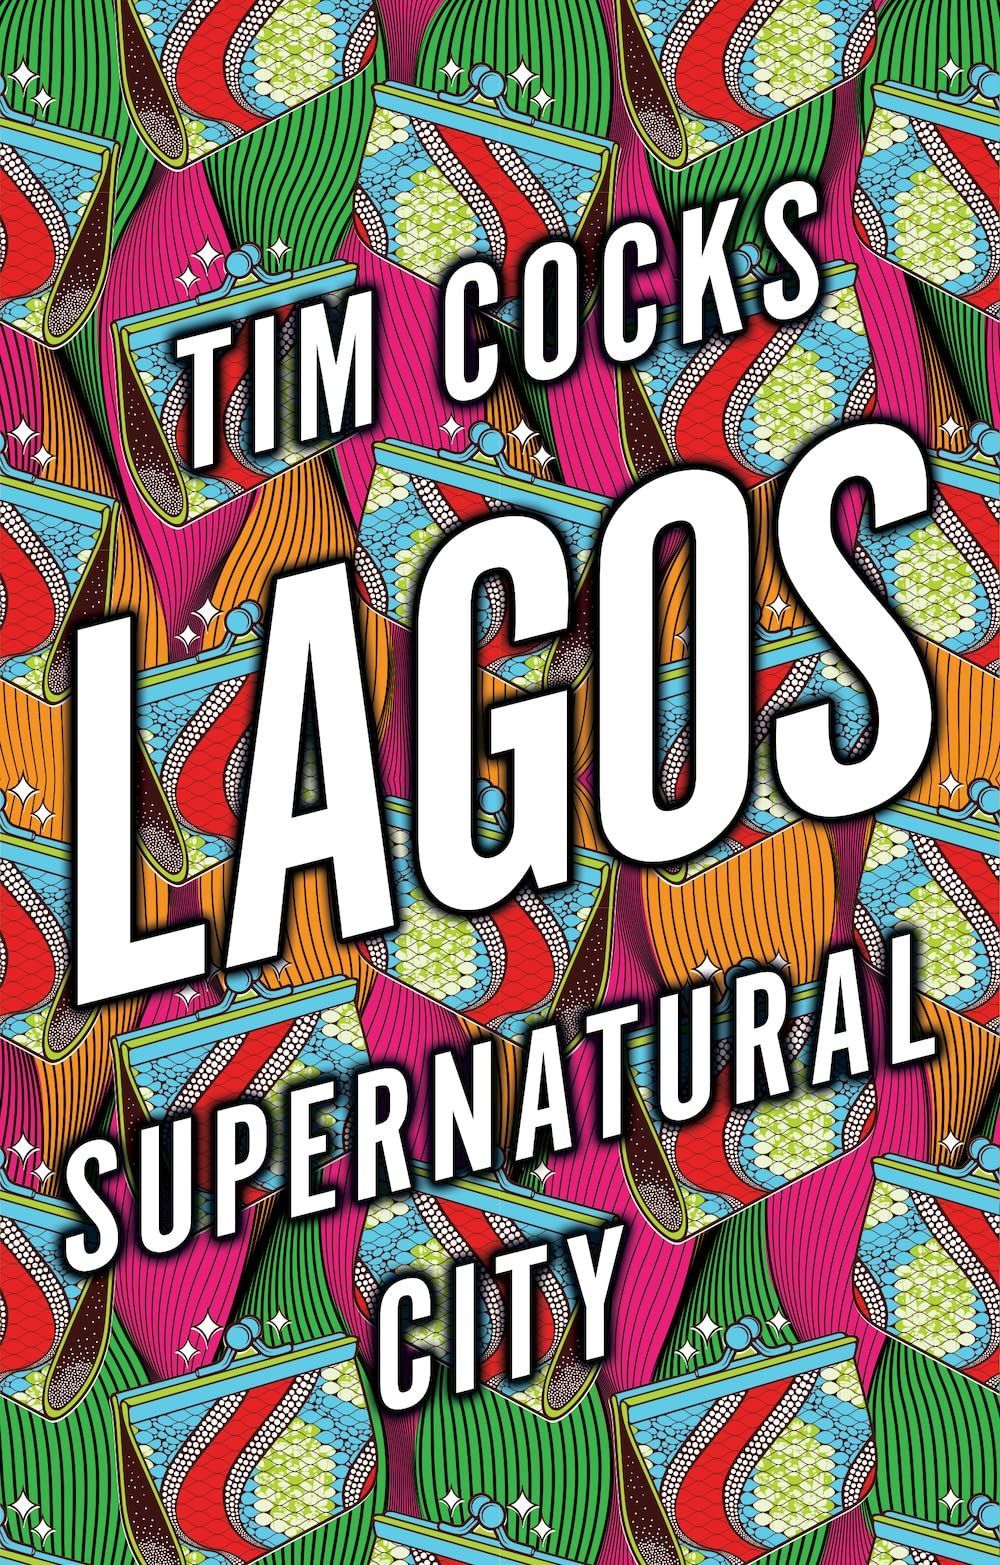 When a White Man Writes a Good Book About Africa: On Tim Cocks’s “Lagos”